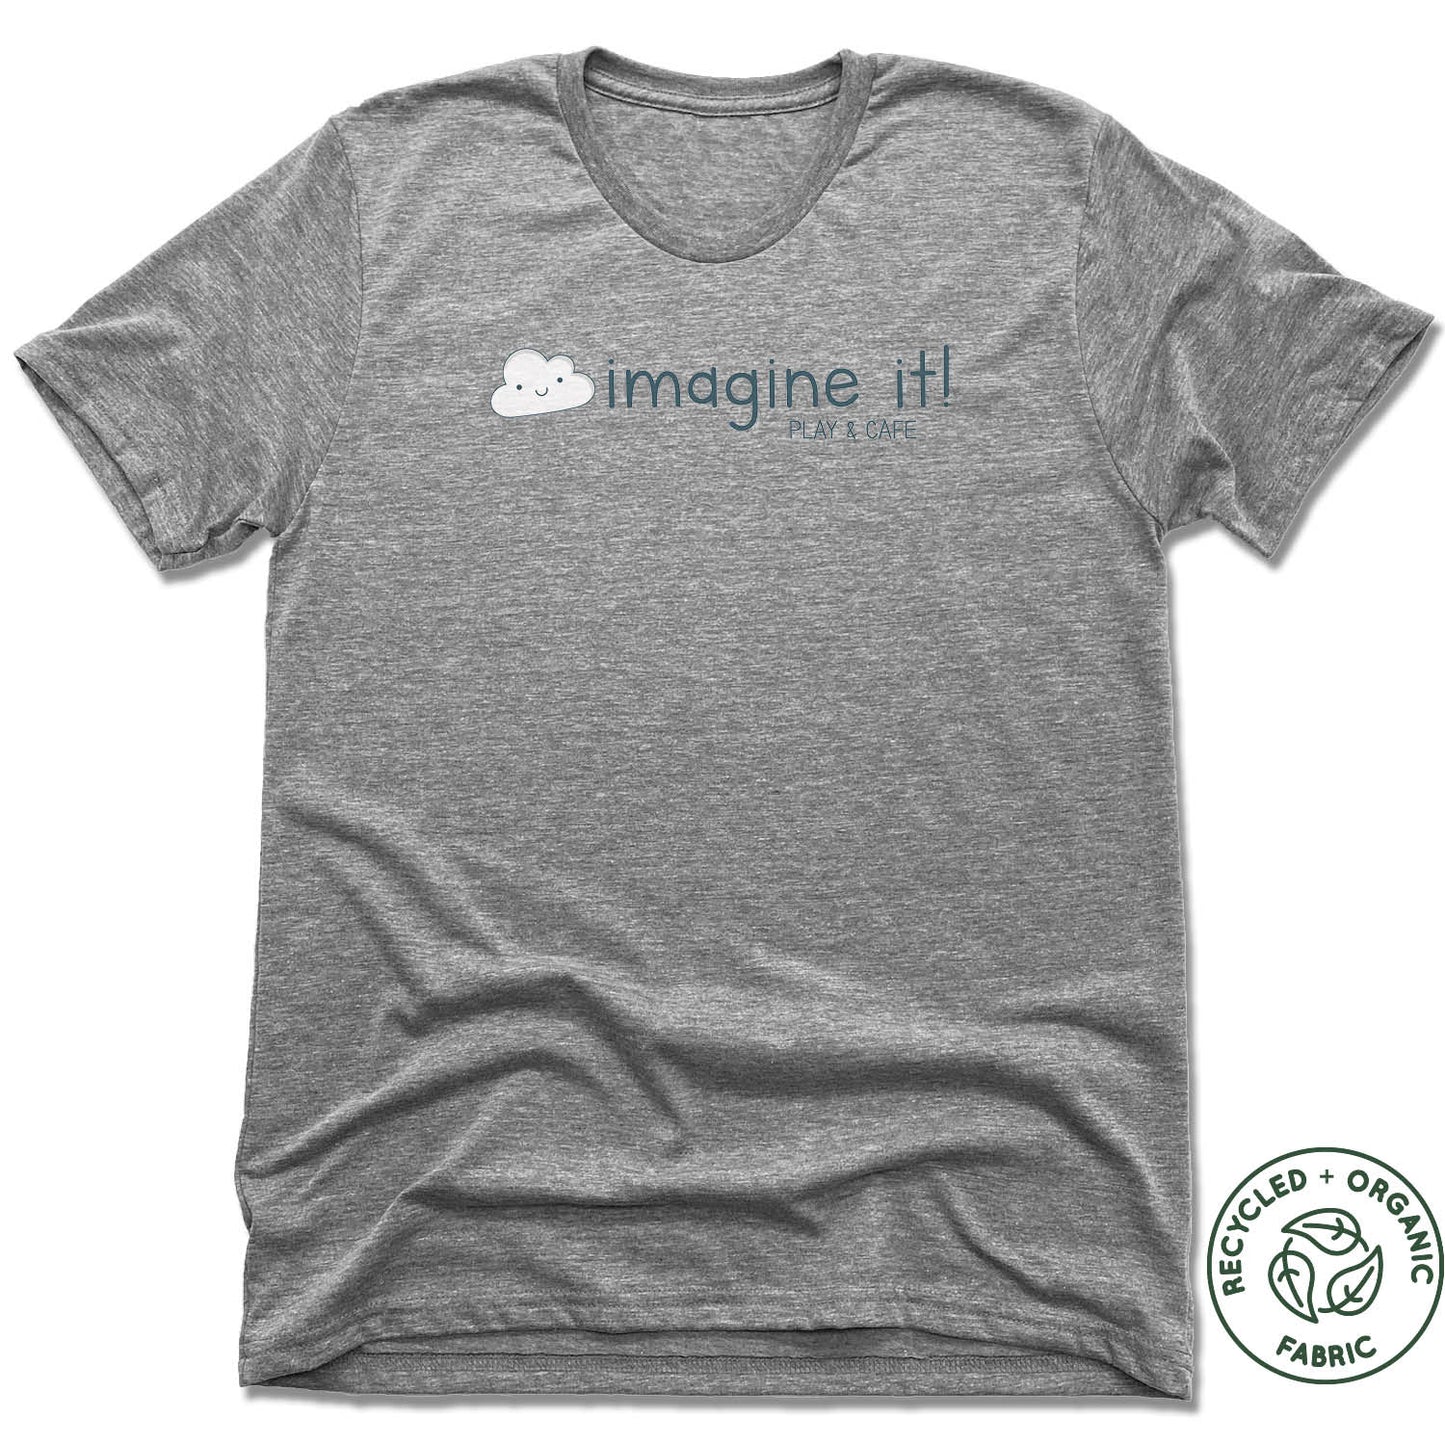 IMAGINE IT! PLAY & CAFE | UNISEX GRAY Recycled Tri-Blend | LOGO